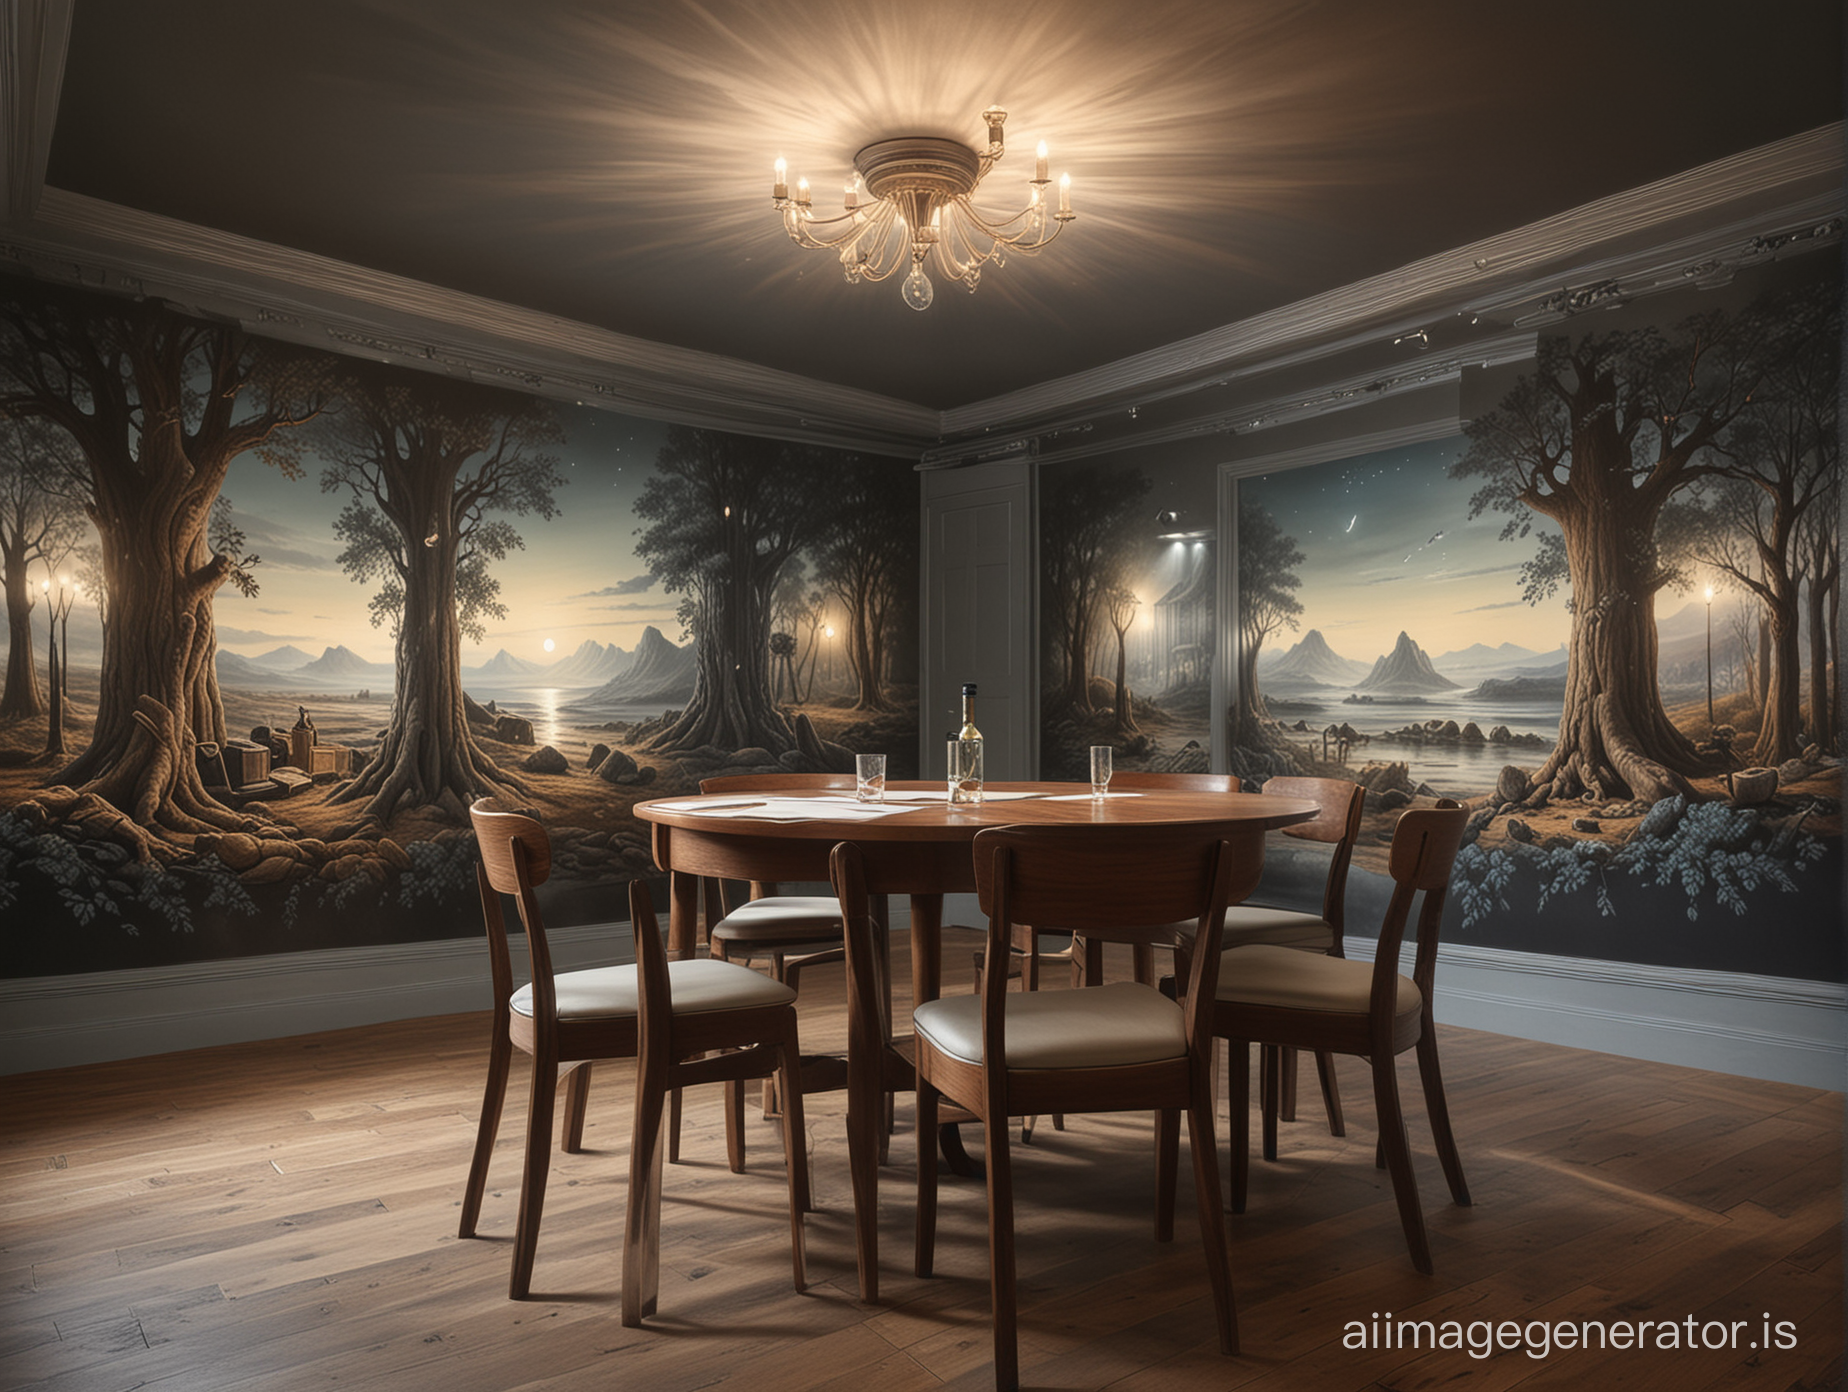 A highly realistic mural capturing room with a dig round table, dimly lit study, in mid-conversation, with the ambiance of the room reflecting a sense of future possibilities, hyper realistic, ultra realistic details